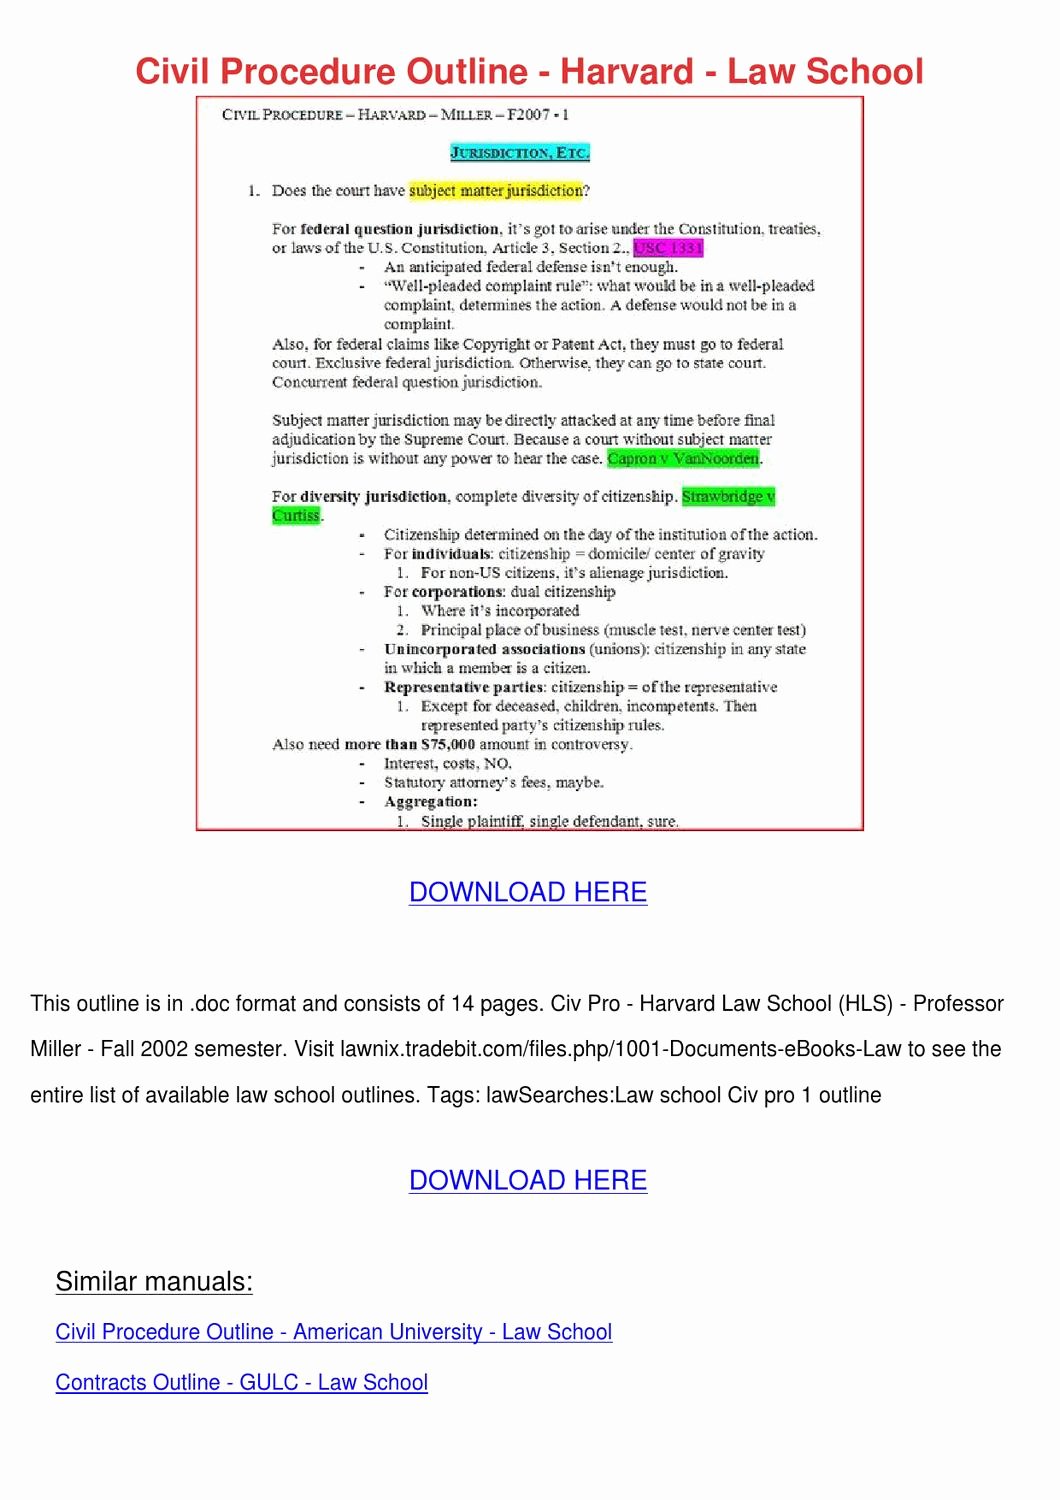 Law School Outline Template Lovely Civil Procedure Outline Harvard Law School by Nicolle